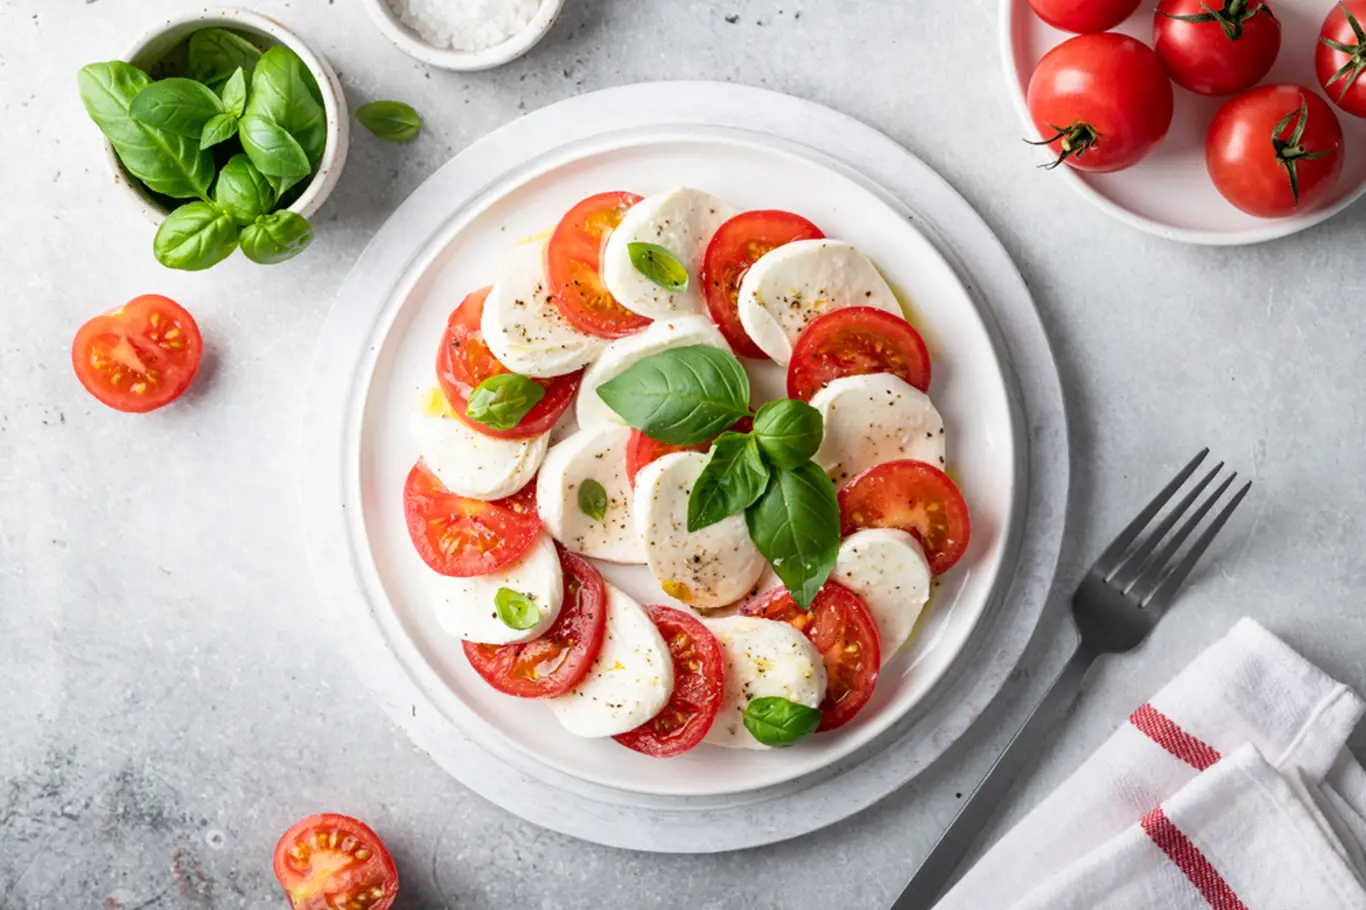 Italian caprese salad with sliced tomatoes, mozzarella, basil, olive oil on a light background. Top view.